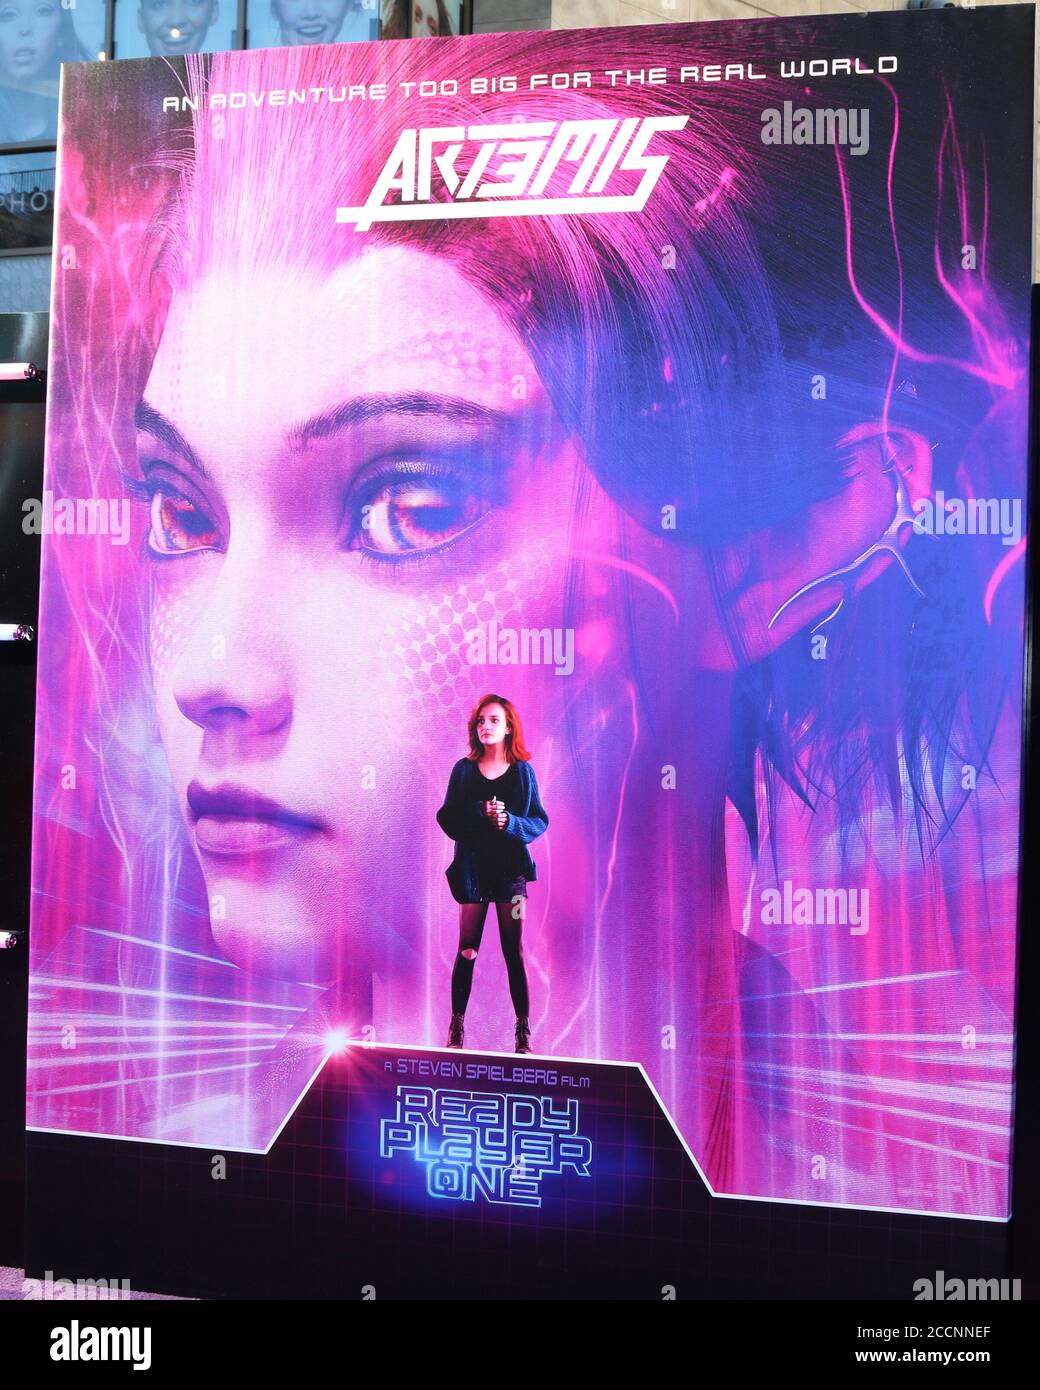 Ready Player One 2018 Movie Poster 24x36 Borderless Glossy 18095